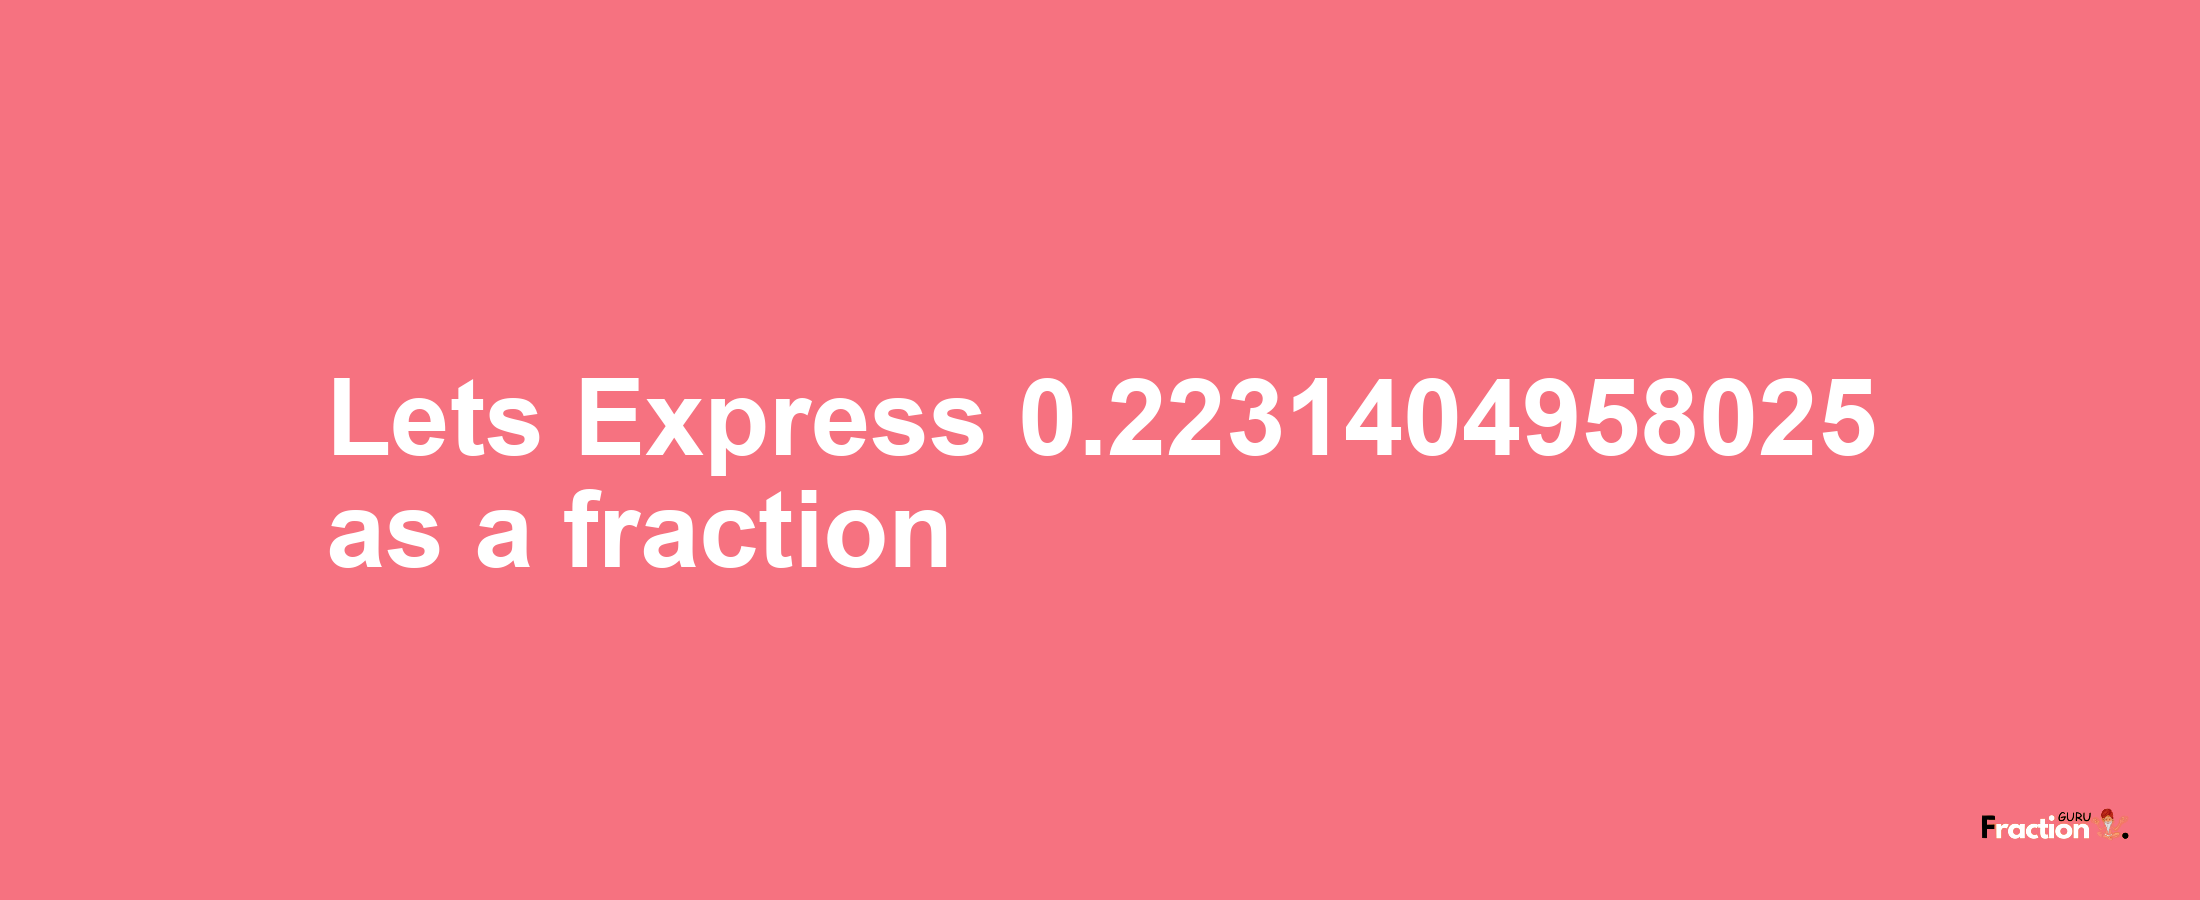 Lets Express 0.2231404958025 as afraction